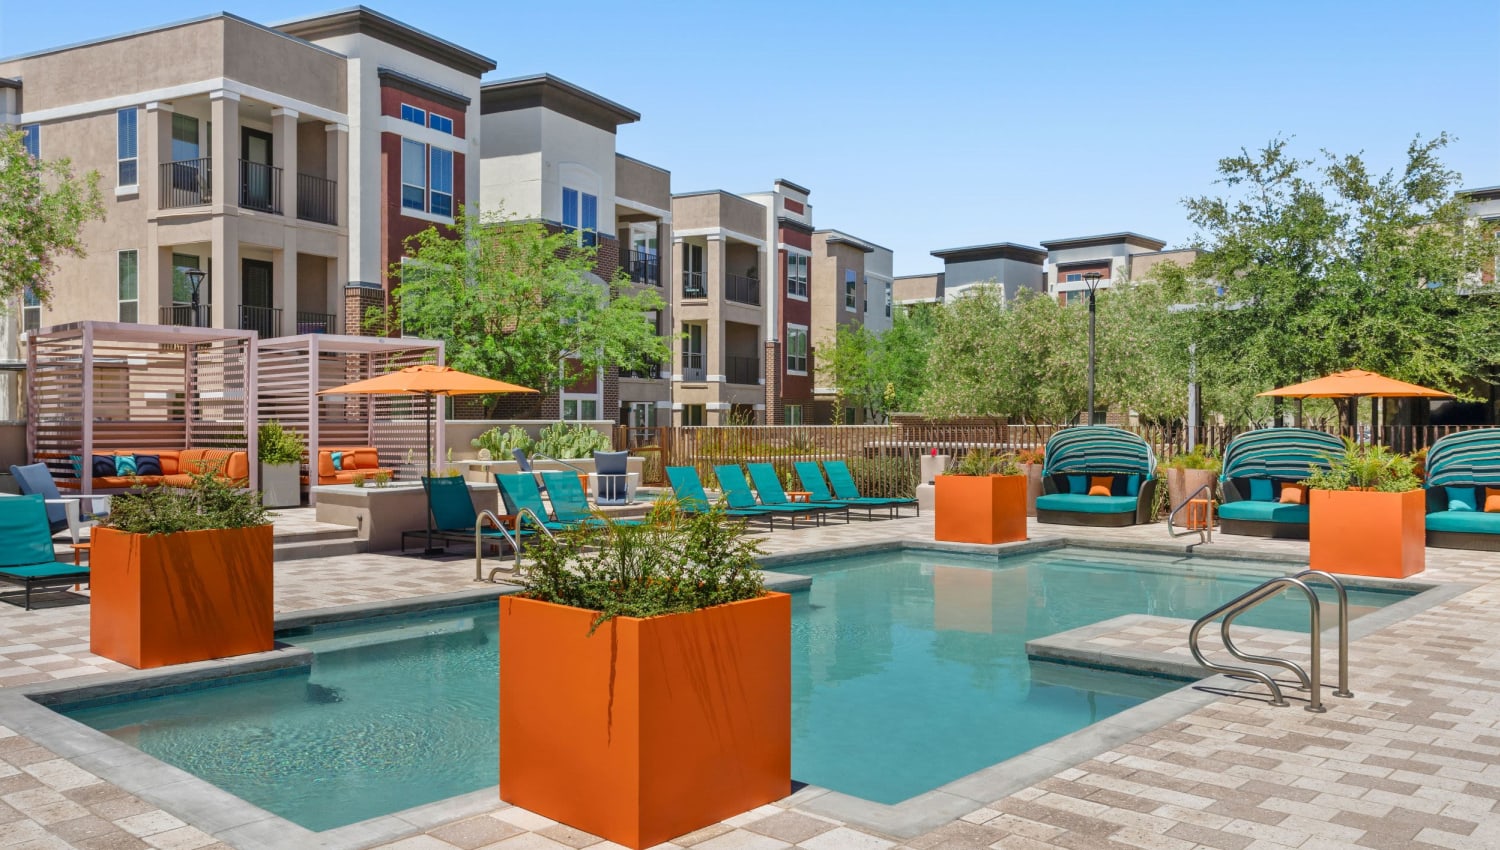 Common pool area at Town Commons in Gilbert, Arizona